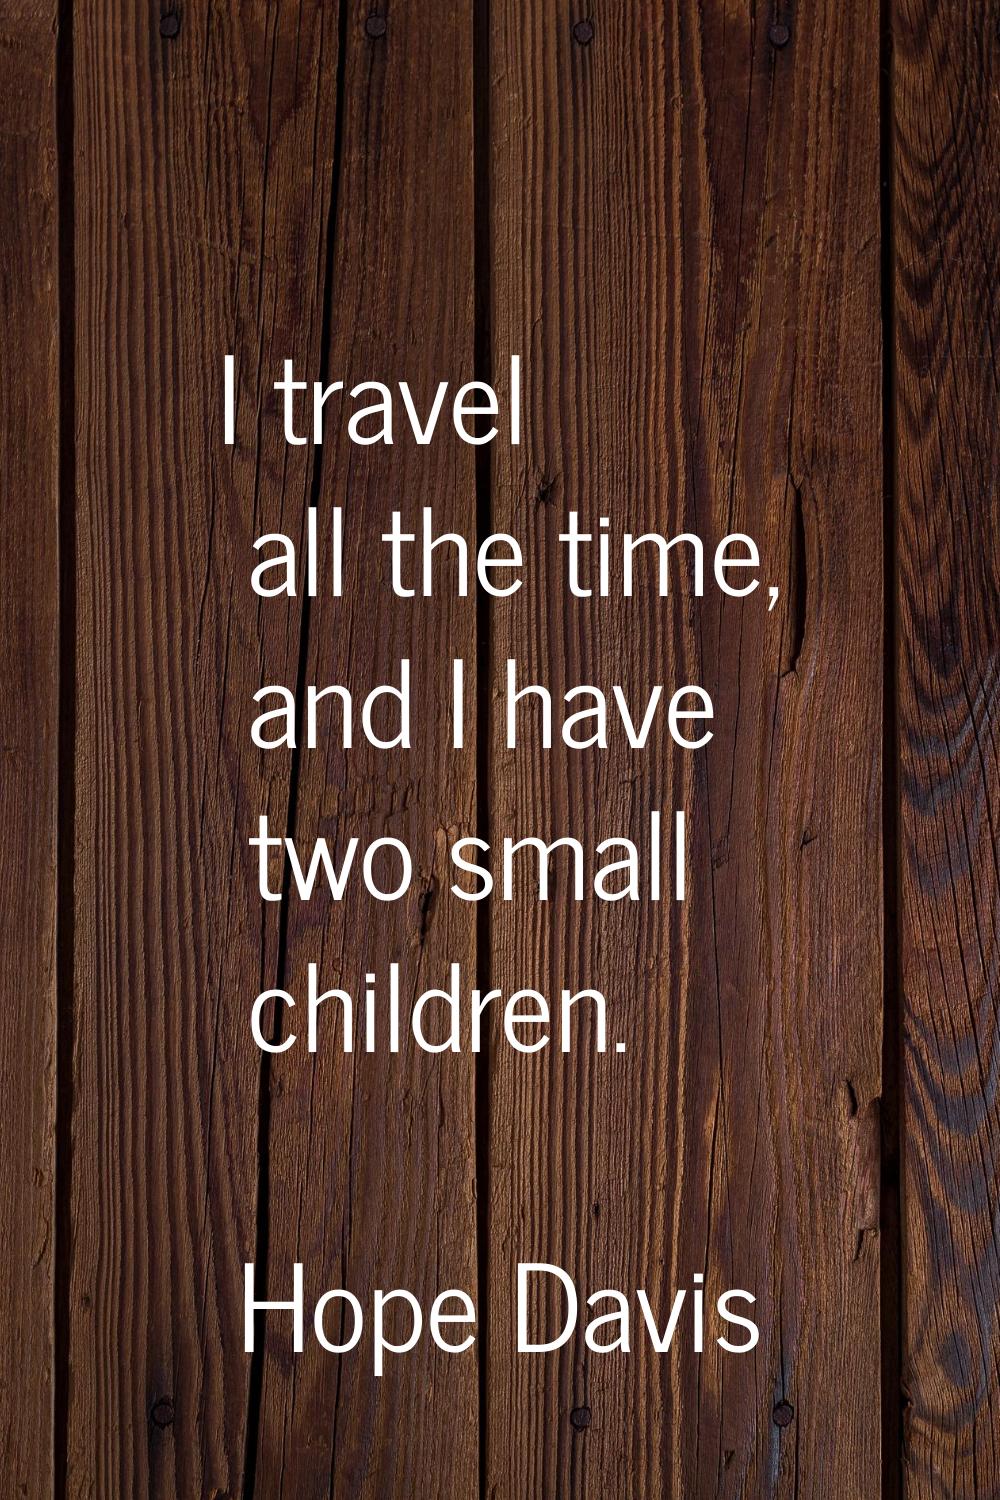 I travel all the time, and I have two small children.